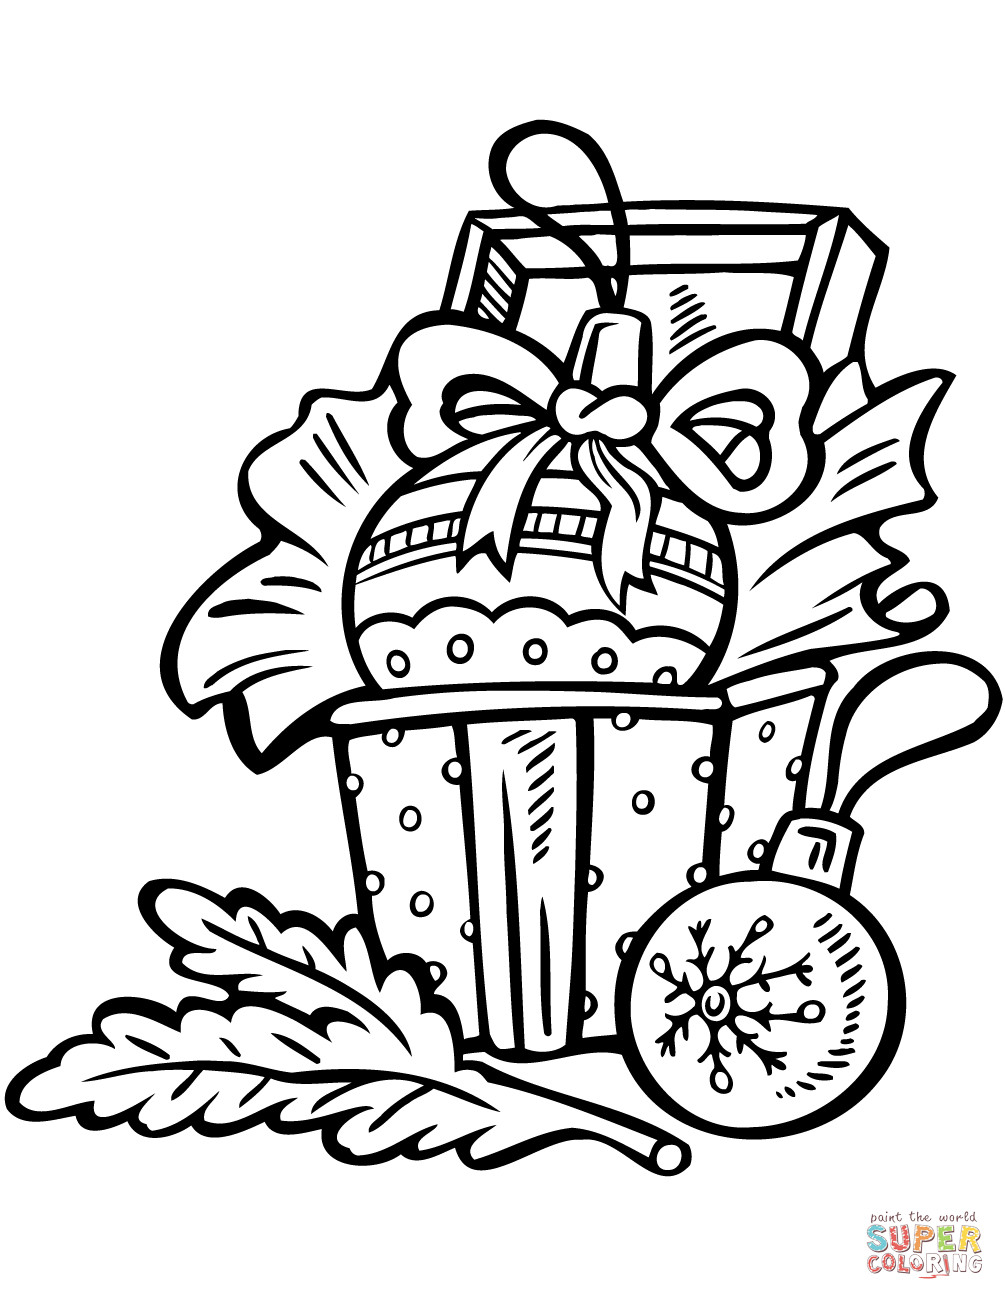 Christmas Ornaments Coloring Pages Printable
 Christmas Ornaments coloring page